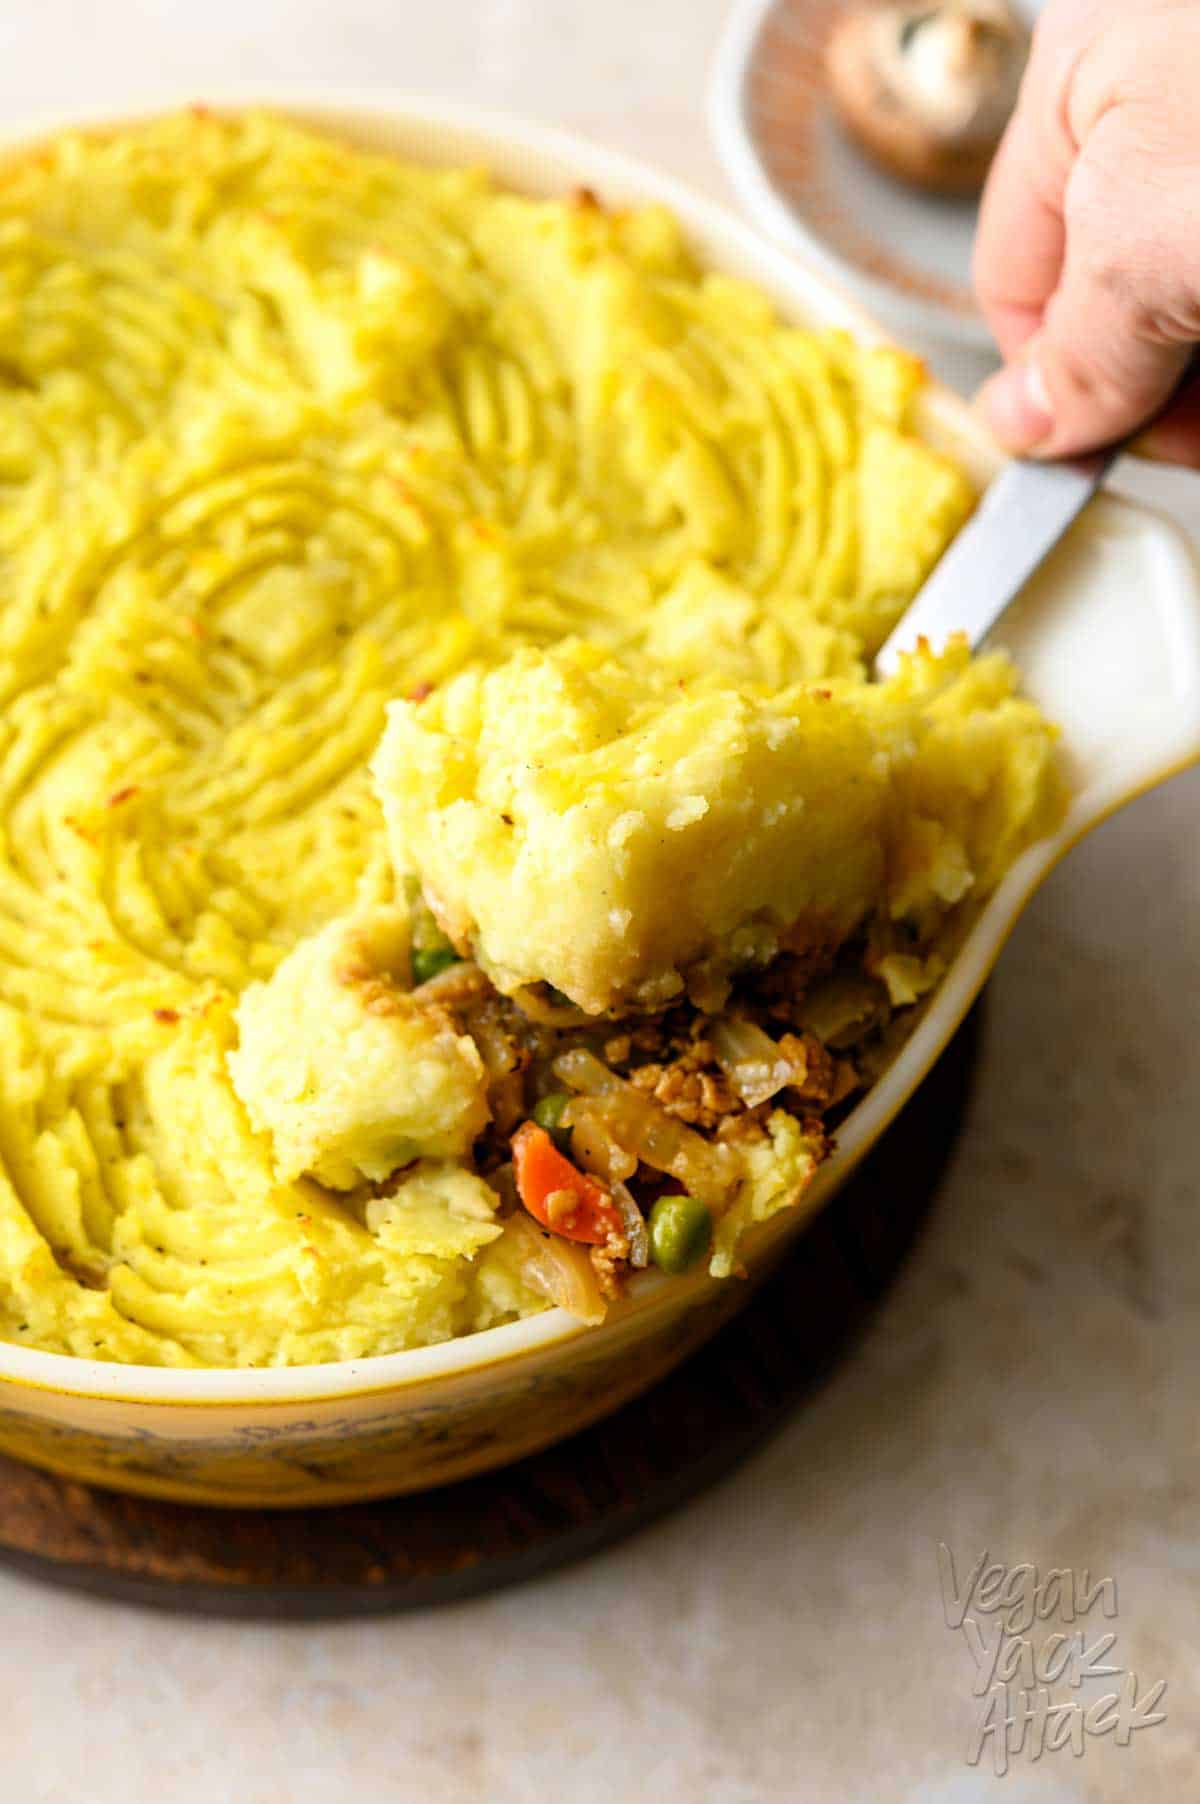 One casserole dish filled with a vegan shepherd's pie, being scooped out with a steel serving spoon, on a light linoleum background.